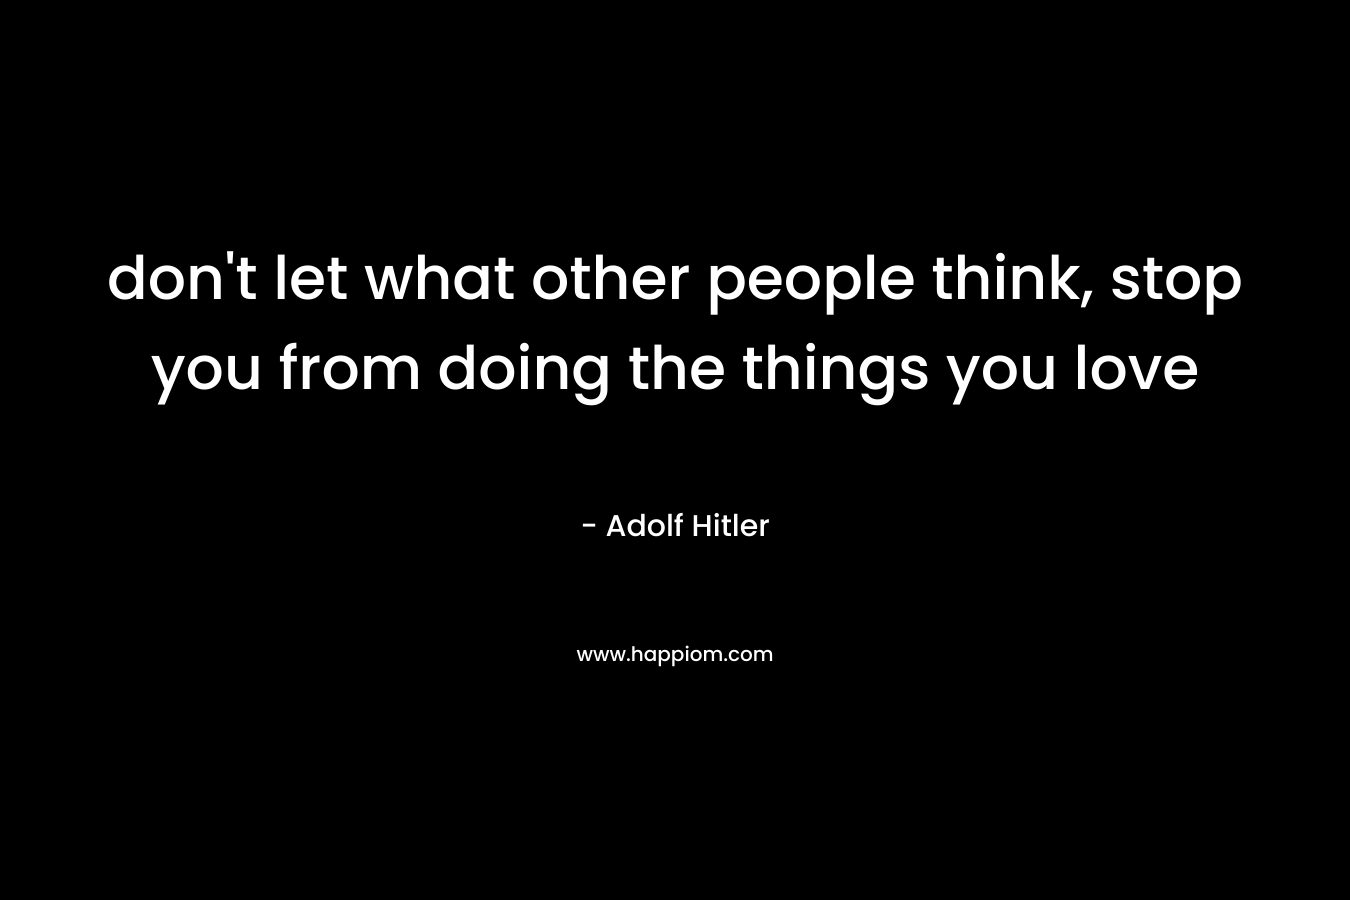 don't let what other people think, stop you from doing the things you love